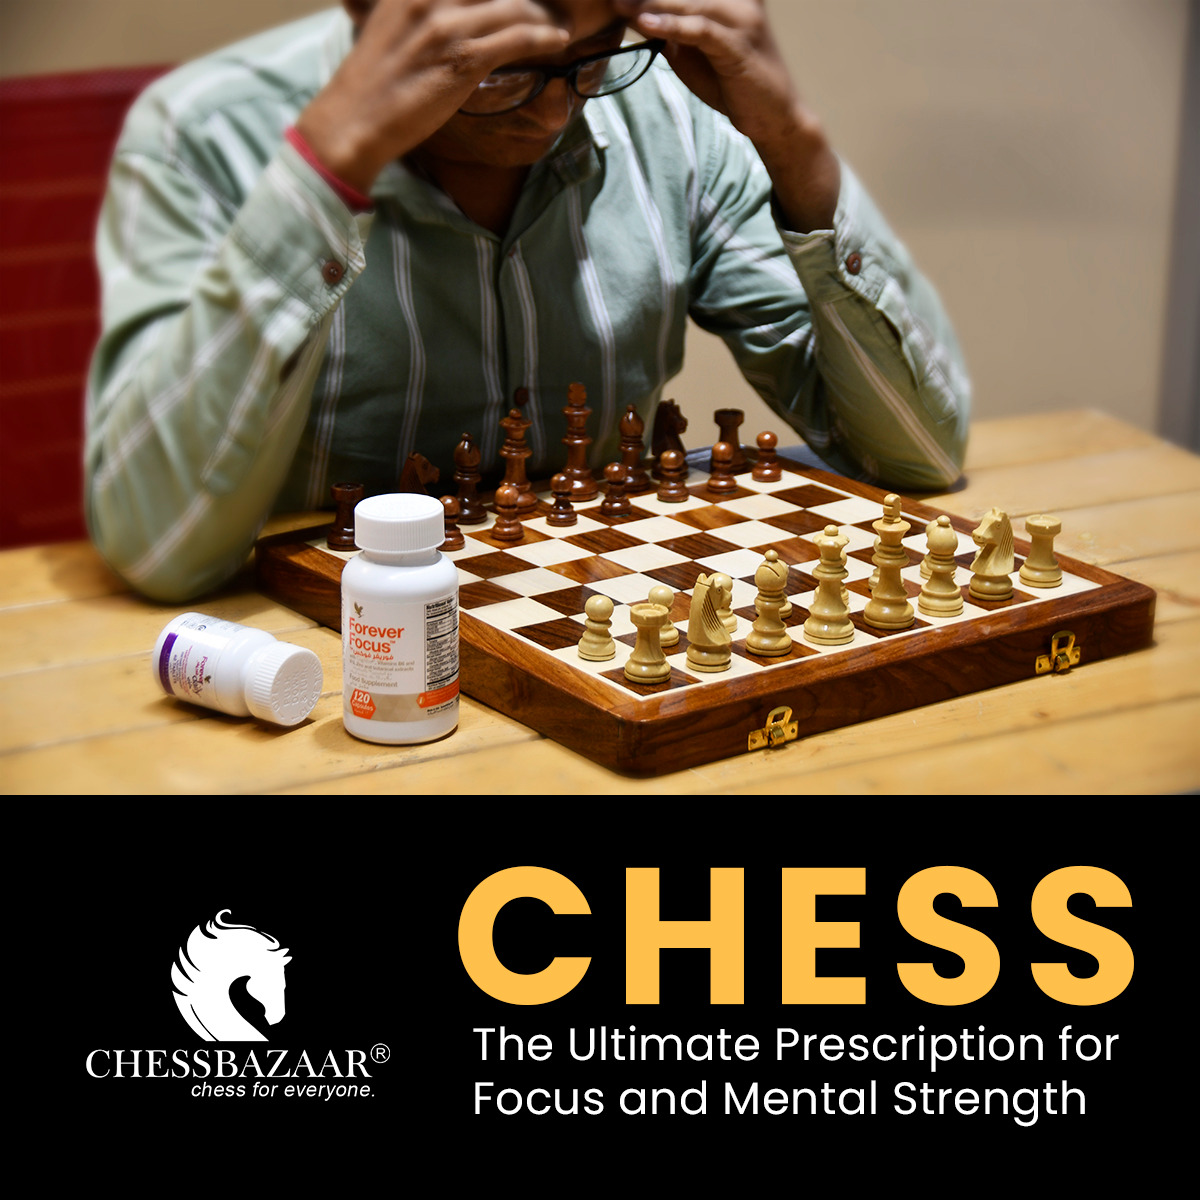 Man trying to concentrate on a chess game